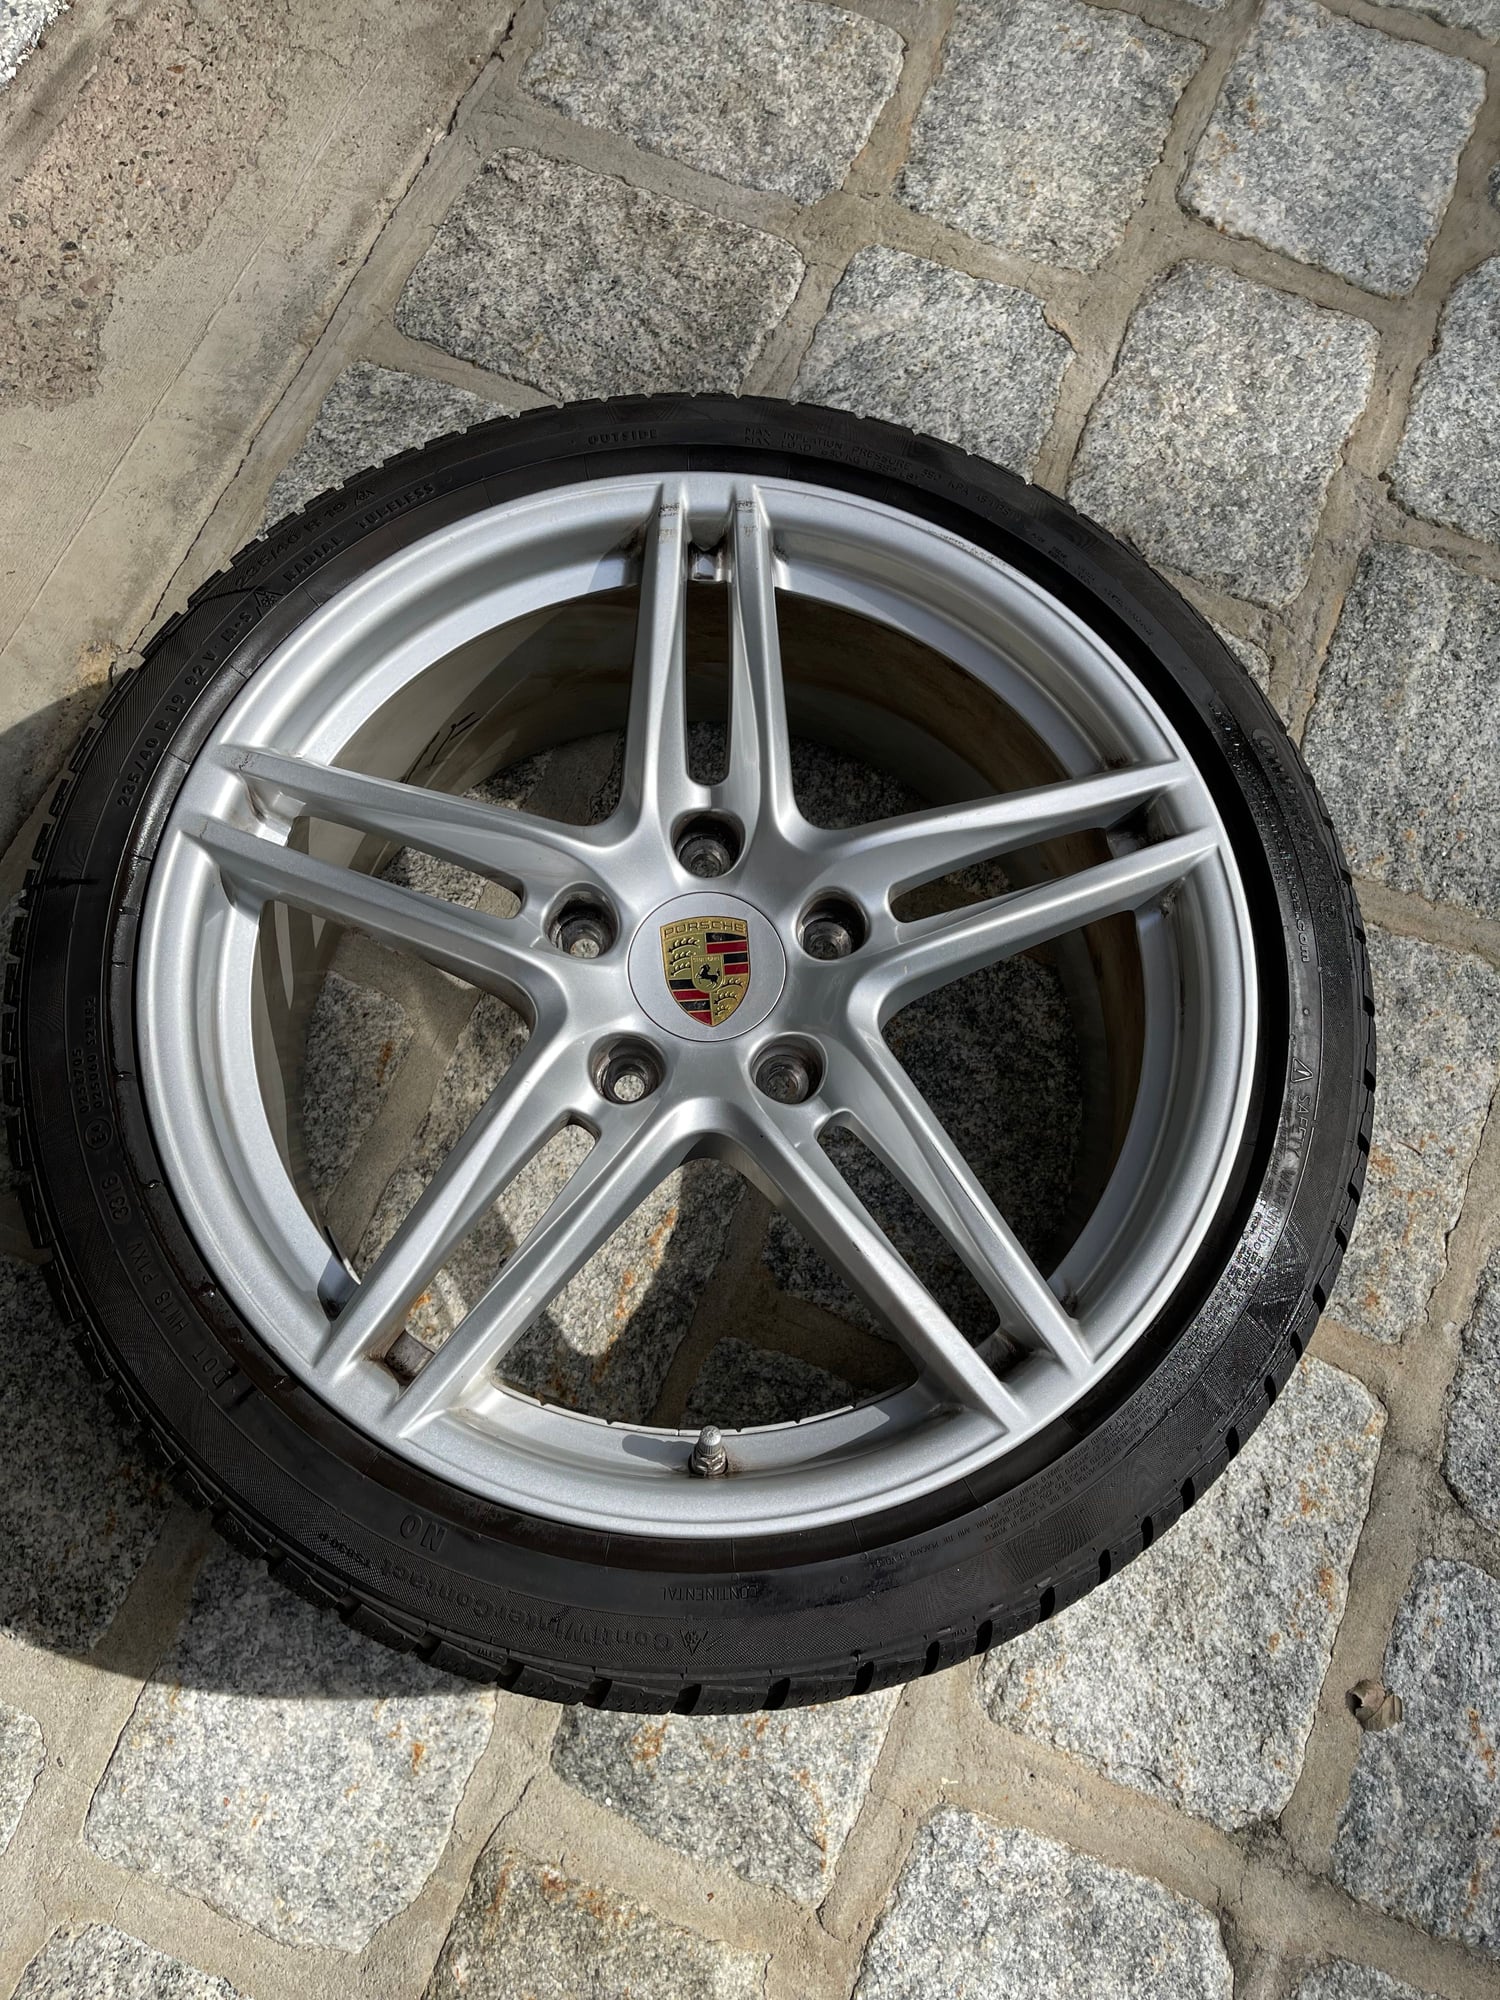 Wheels and Tires/Axles - 911 snow tires and rims - Used - 2012 to 2018 Porsche 911 - Franklin Lakes, NJ 07417, United States